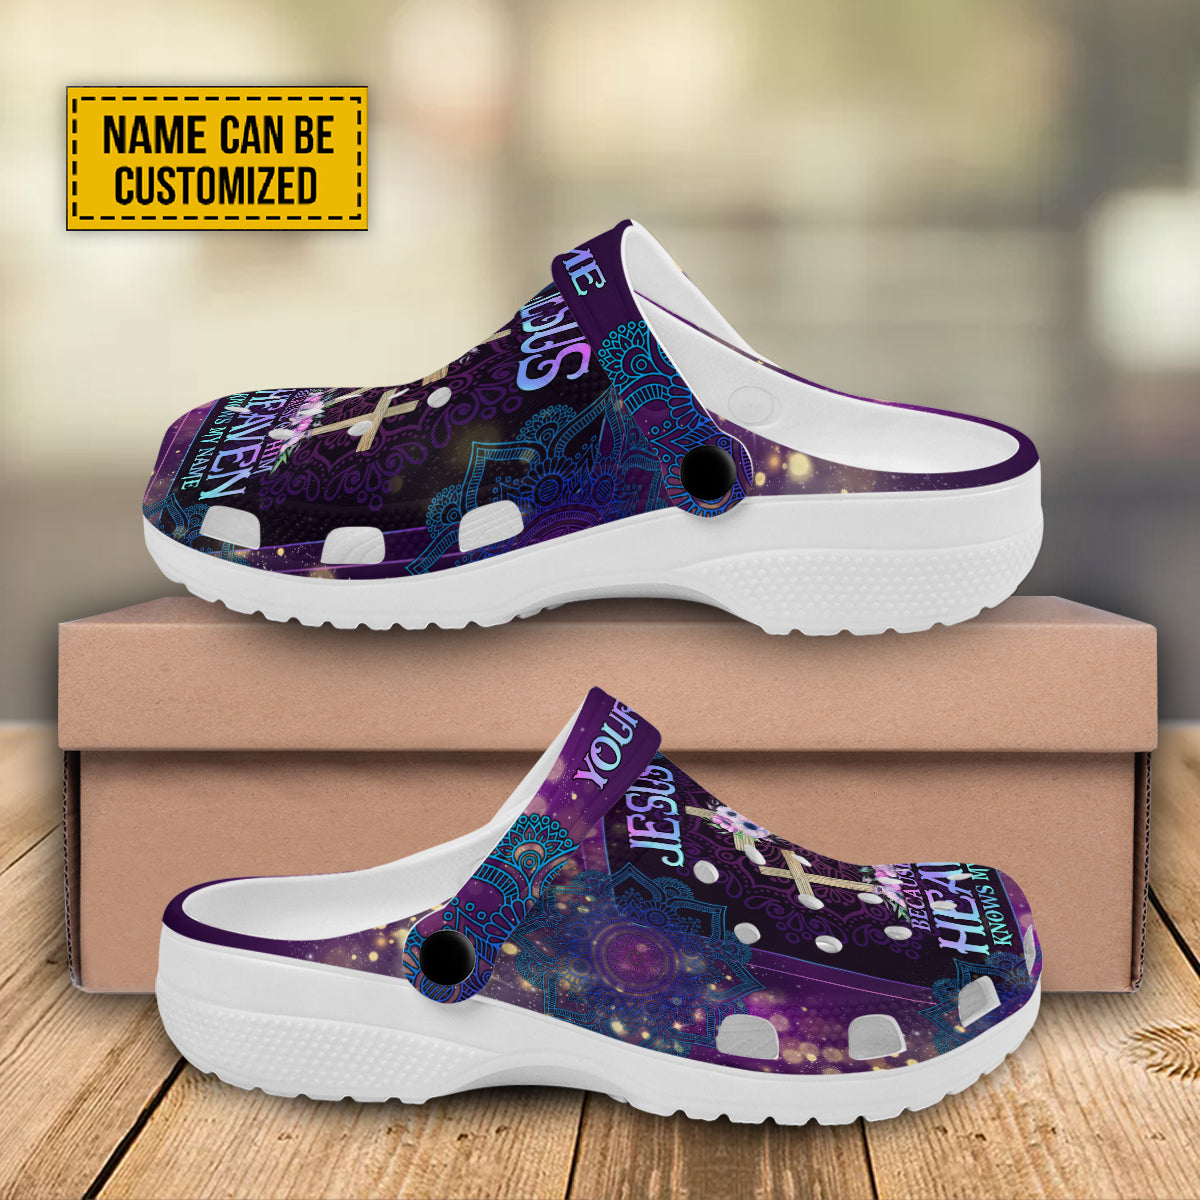 Teesdily | Jesus Because Of Him Heaven Knows My Name Customized Clogs Shoes, God Faith Believers, Christian Gifts, Purple Jesus Clogs Shoes, Kid & Adult Unisex Clogs Shoes Eva